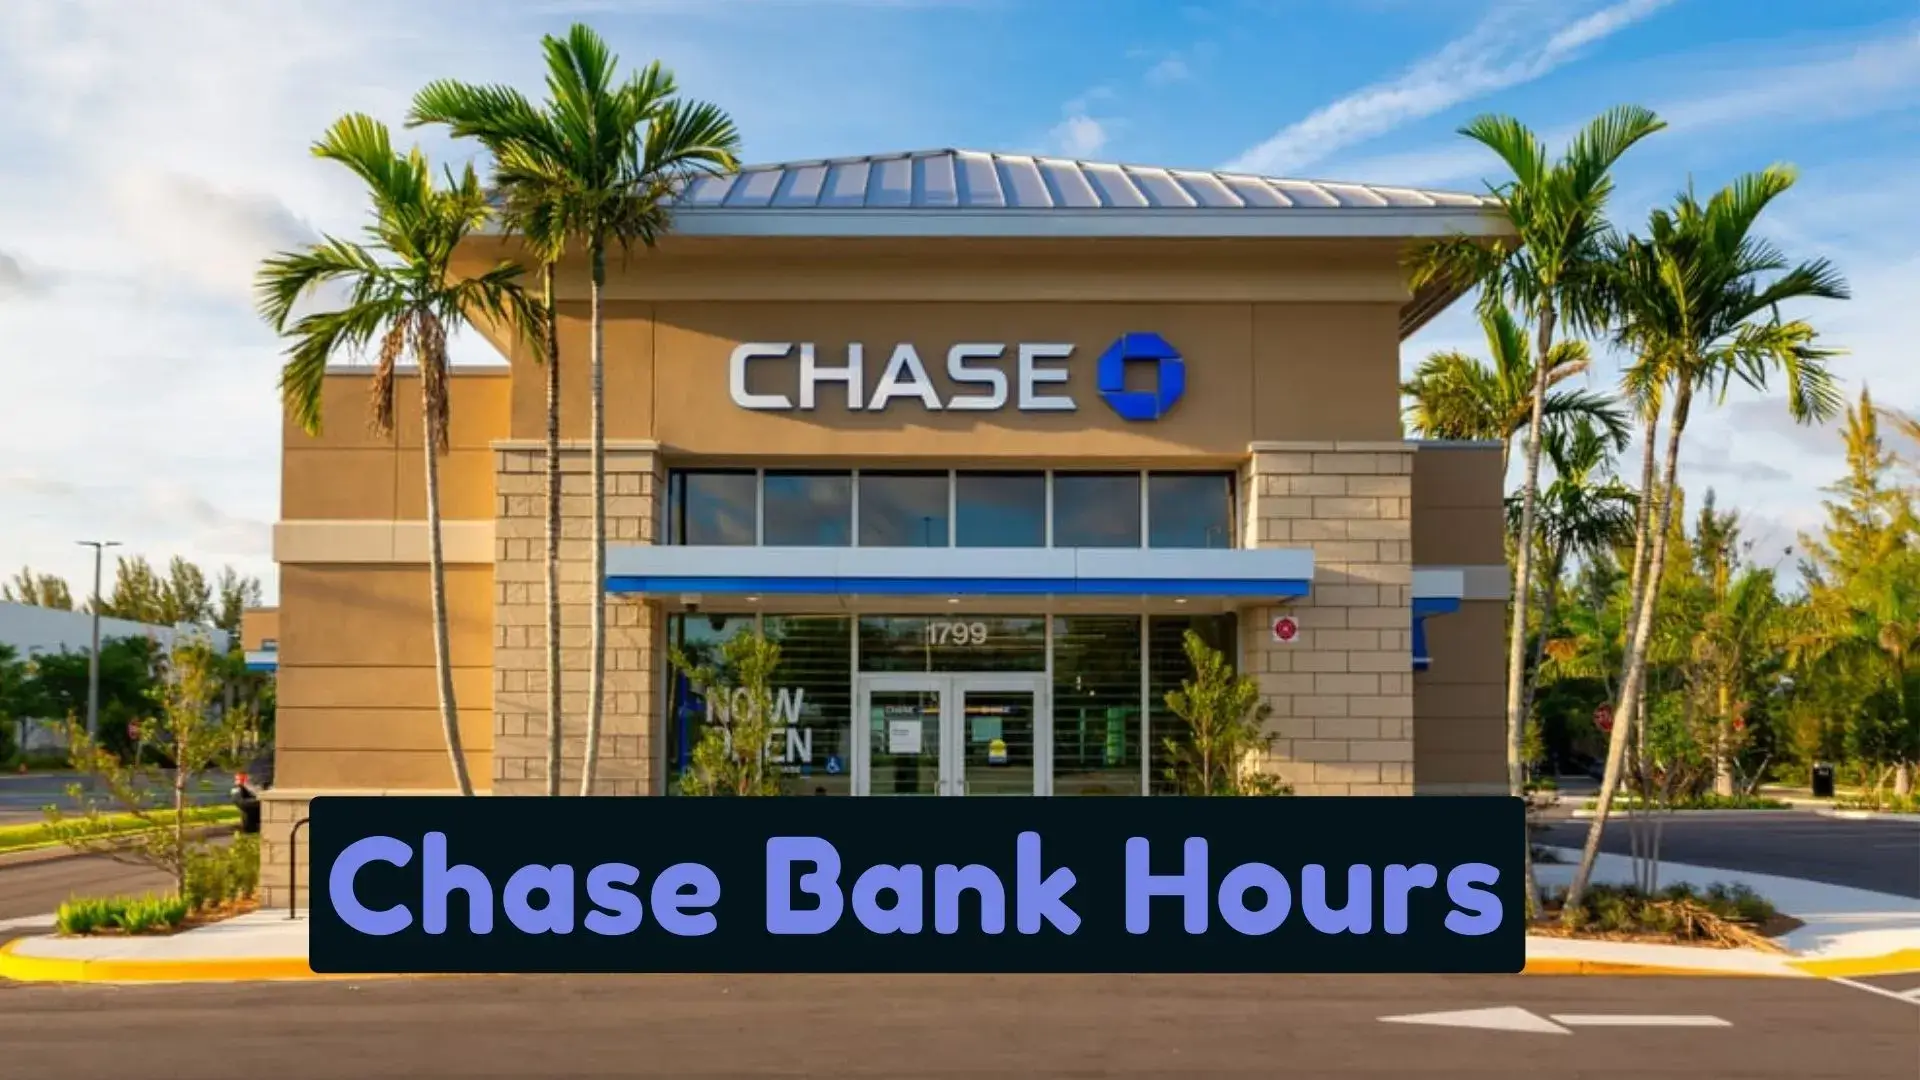 Chase Bank Hours - Near Me [ What Time Does Chase Bank Close-Open ? ]